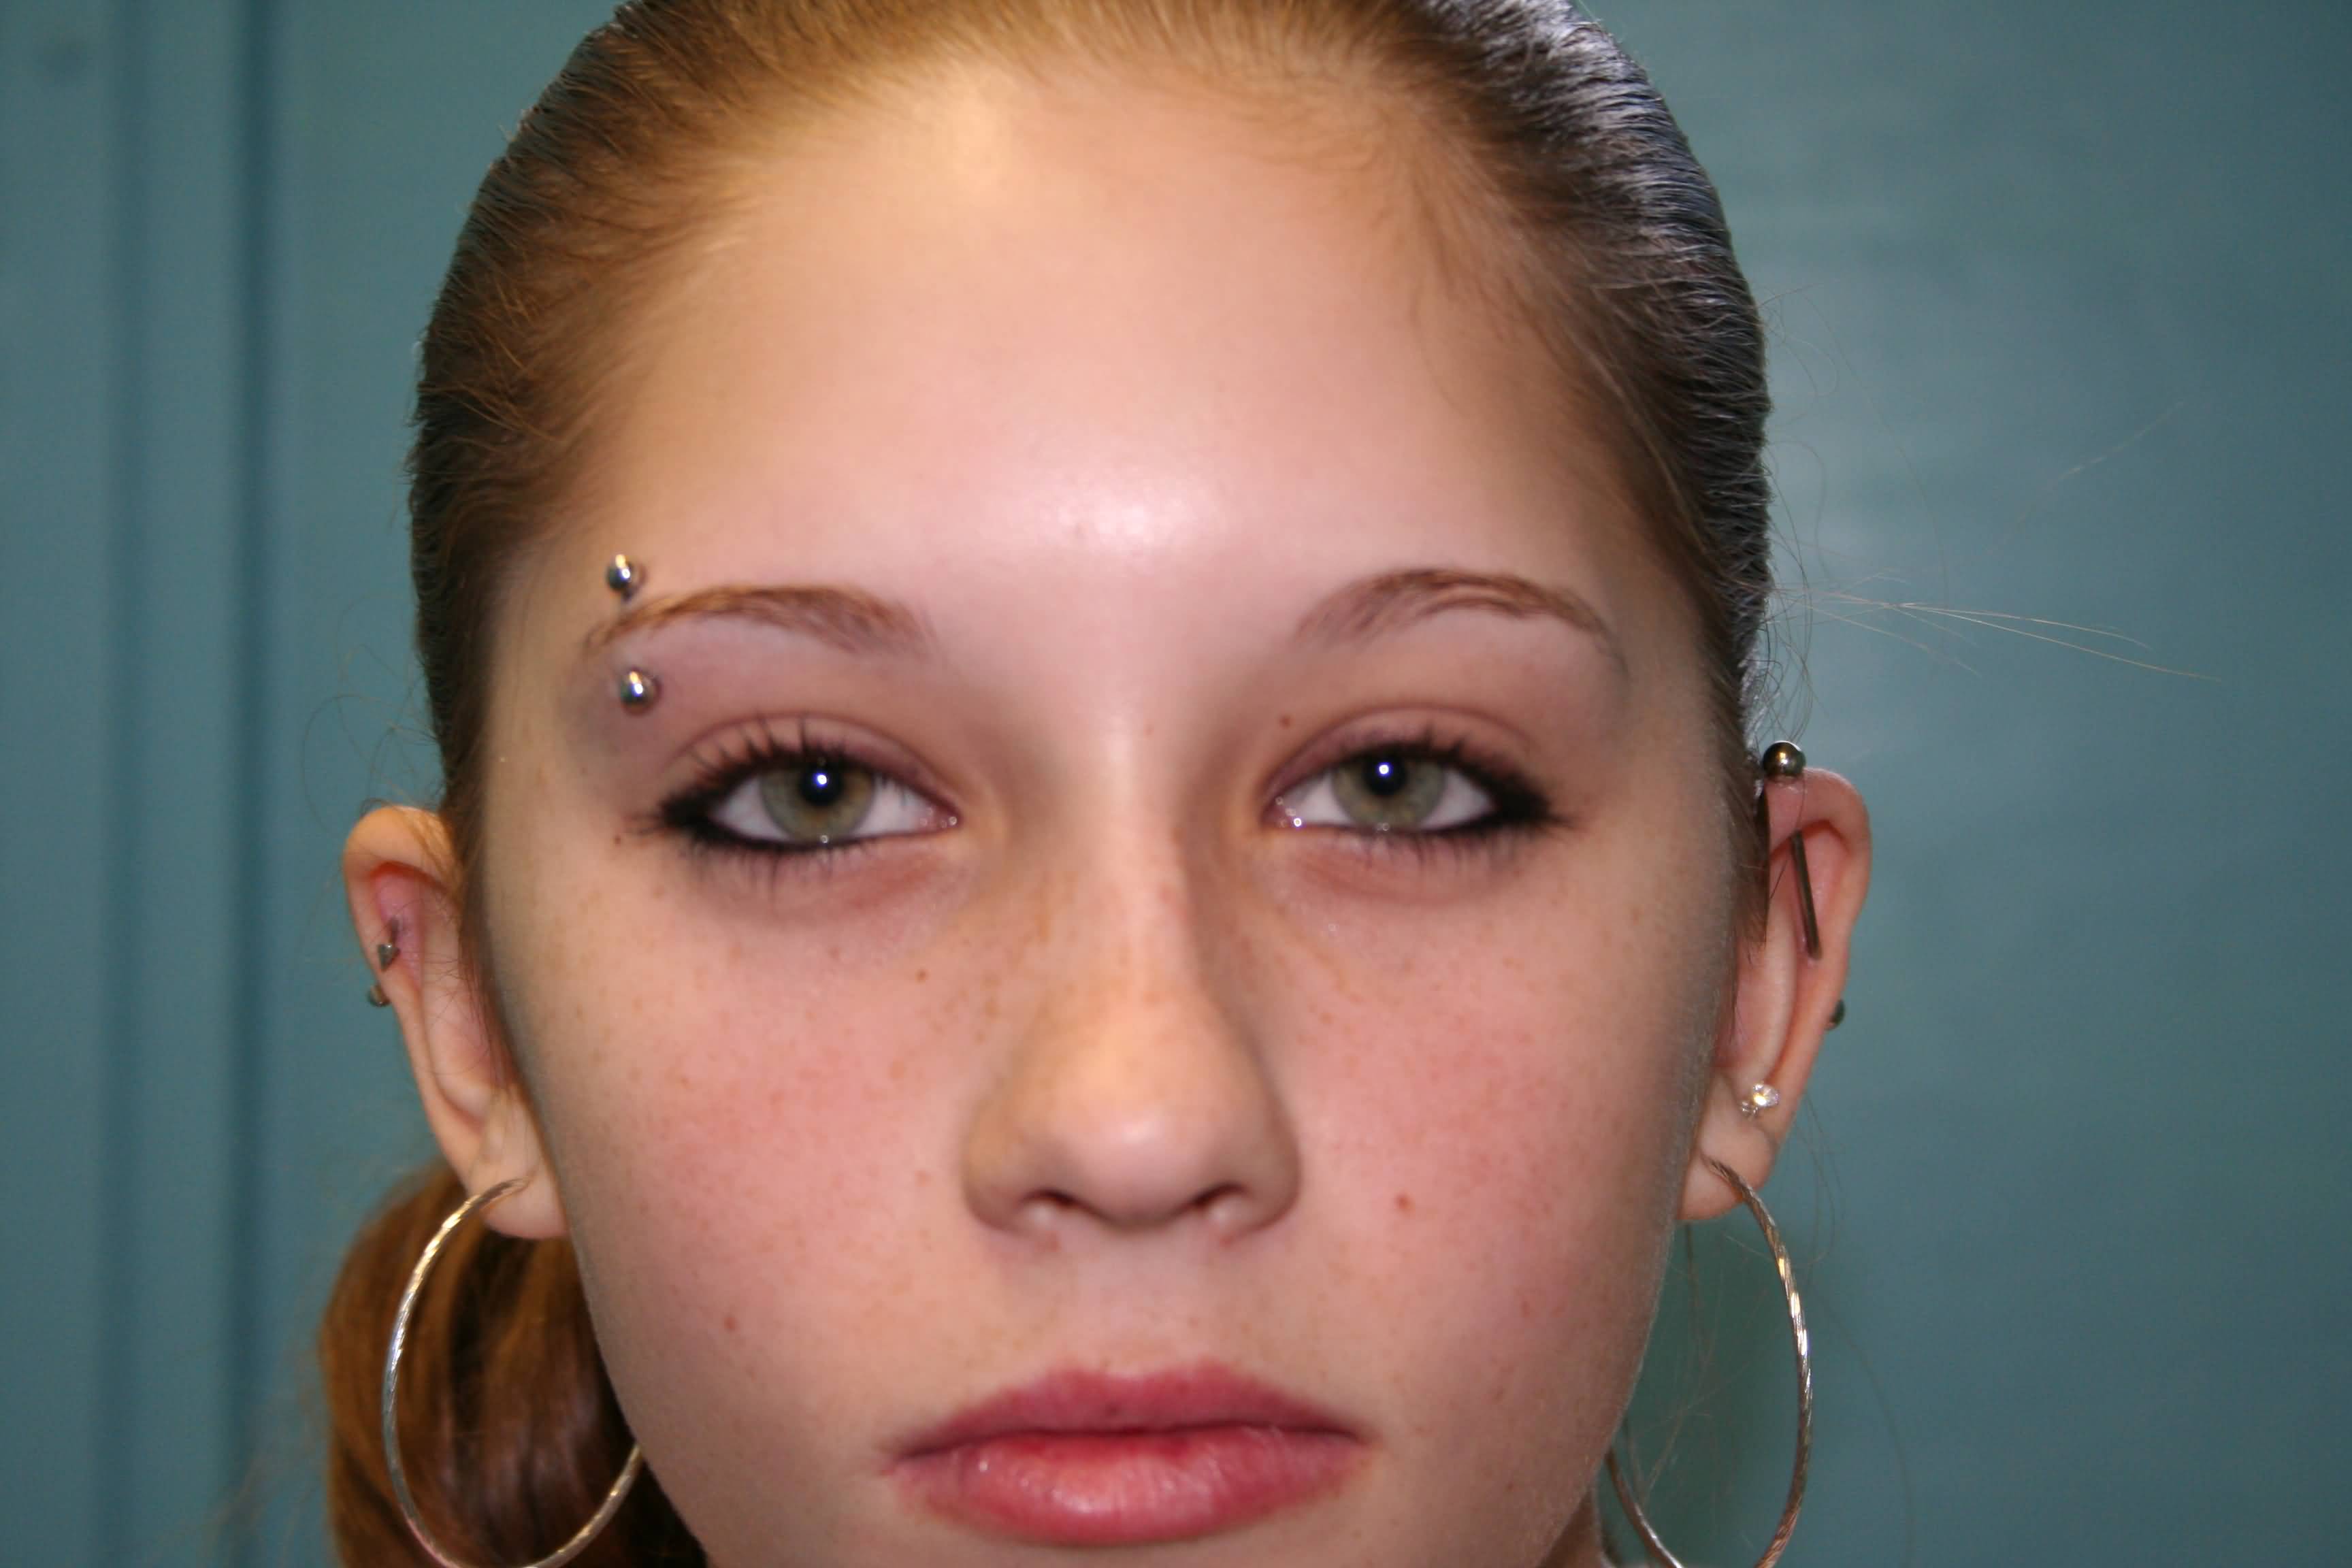 Girl With Right Eyebrow Piercing With Barbell